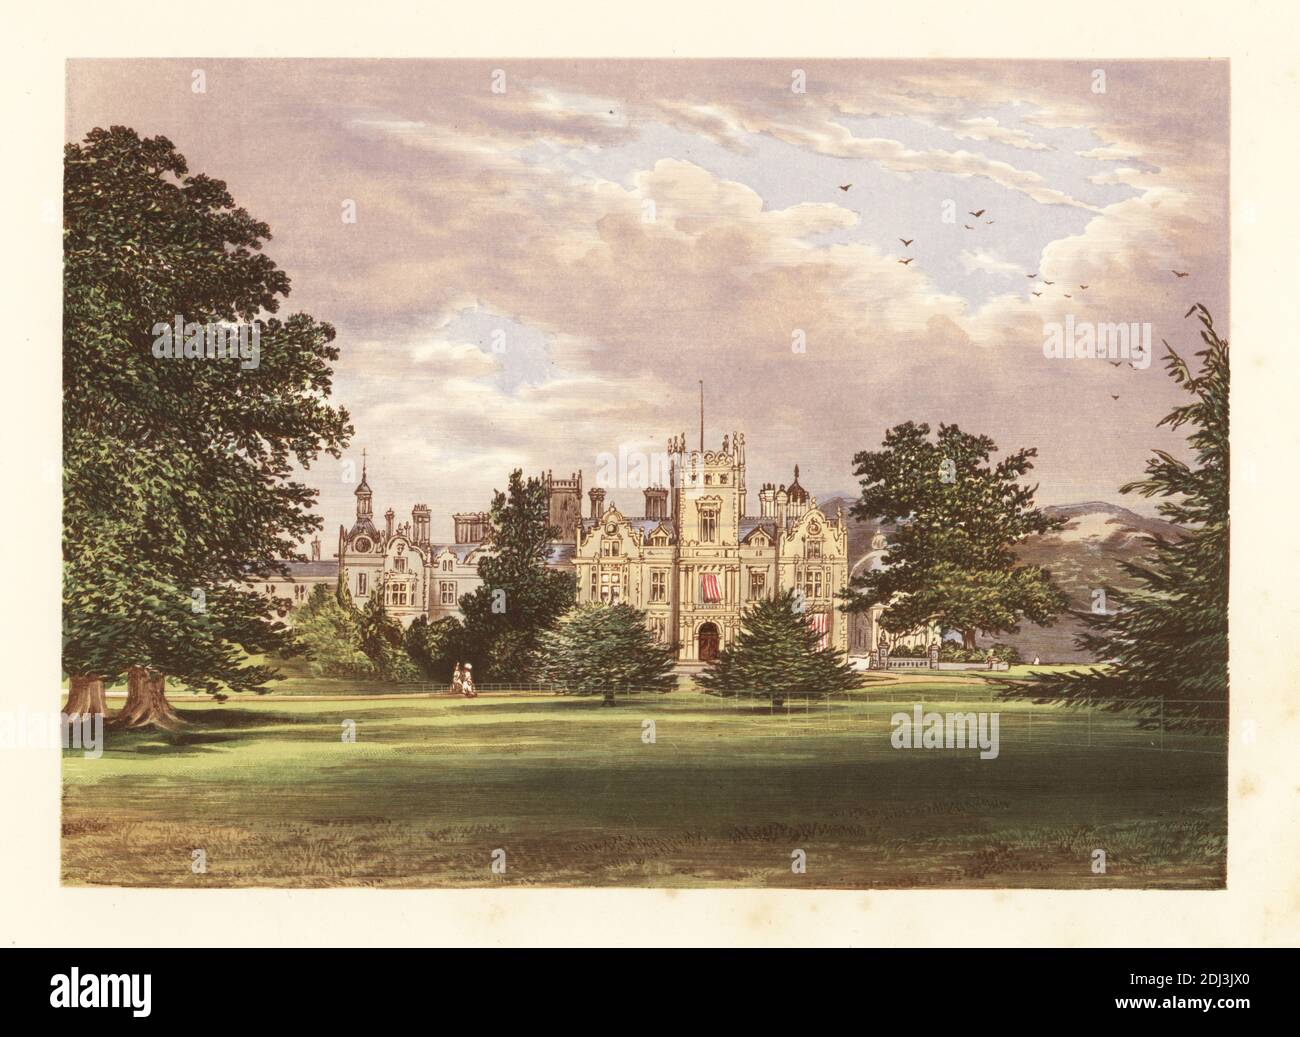 Preston Hall, Kent, England. Jacobean-style house built by architect John Thomas for railway contractor Edward Ladd Betts between 1848 and 1866. Colour woodblock by Benjamin Fawcett in the Baxter process of an illustration by Alexander Francis Lydon from Reverend Francis Orpen Morris’s Picturesque Views of the Seats of Noblemen and Gentlemen of Great Britain and Ireland, William Mackenzie, London, 1880. Stock Photo